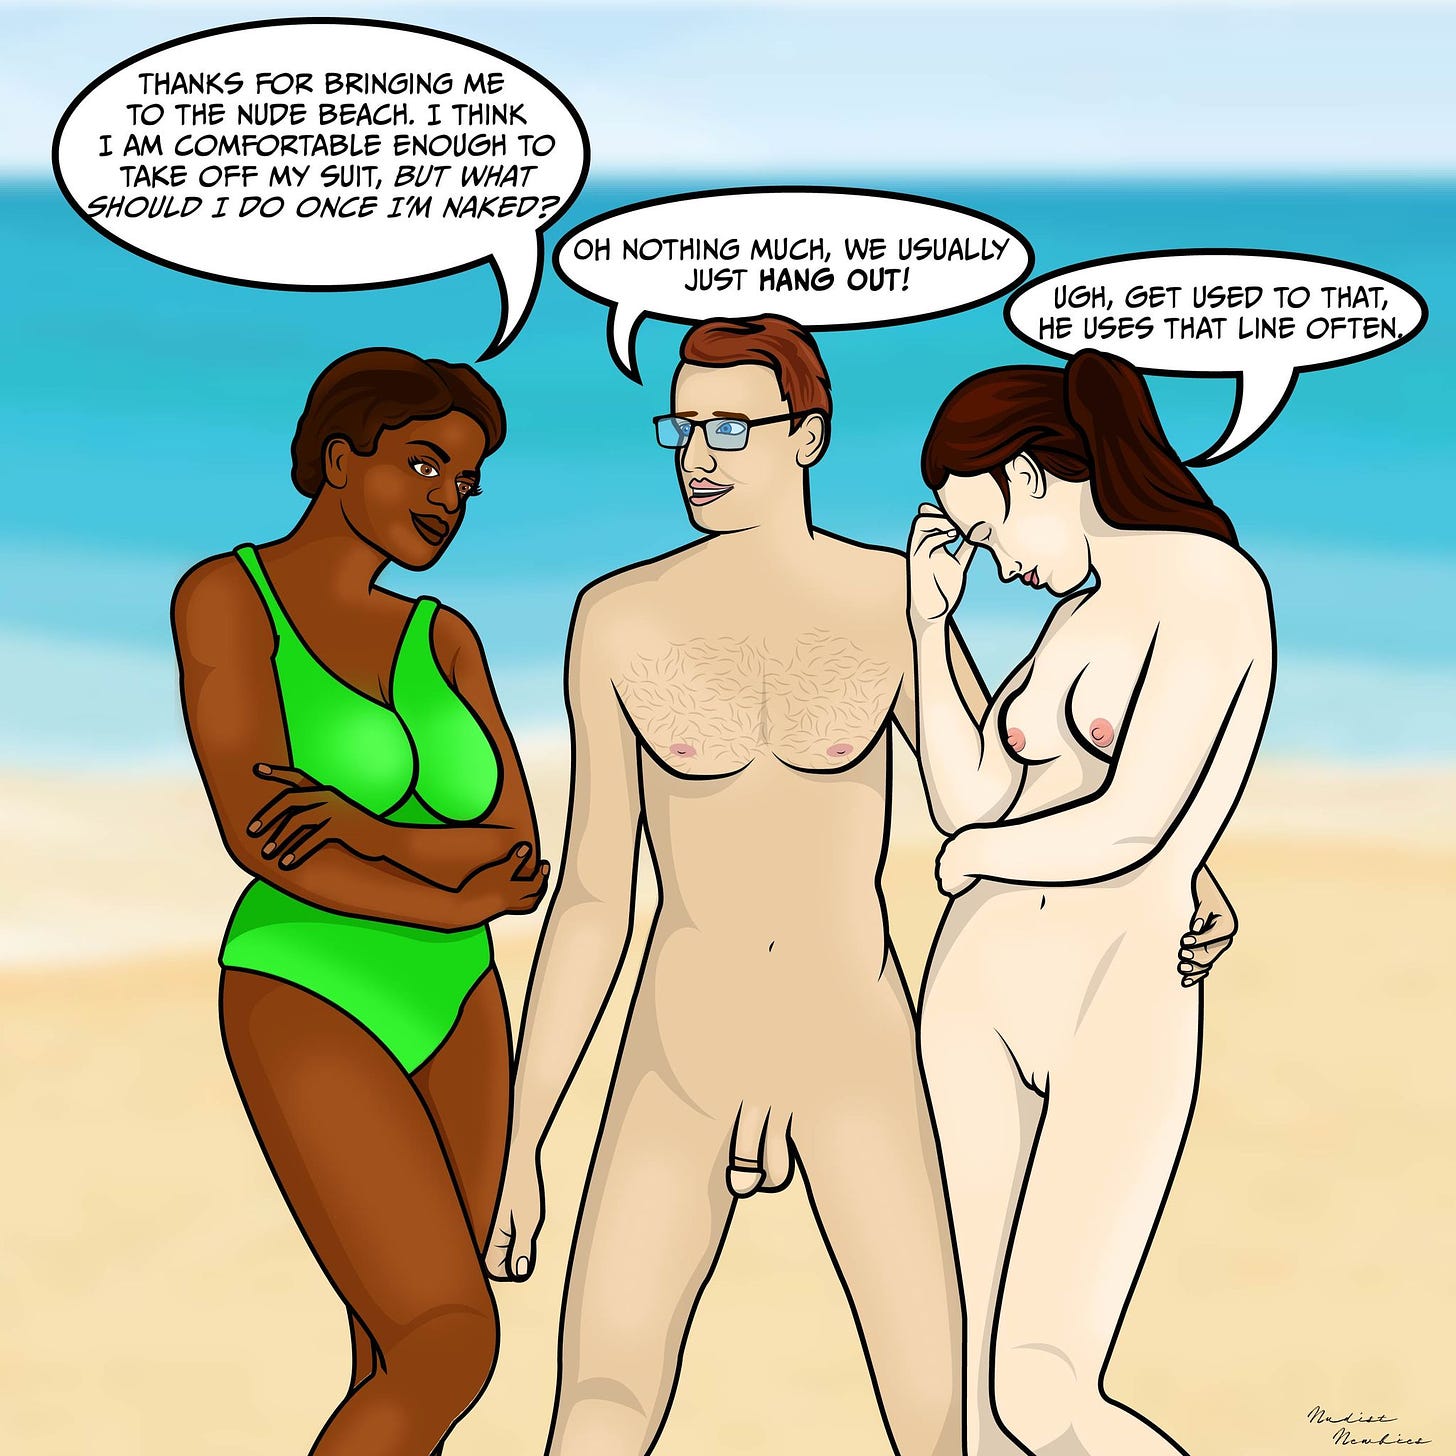 The Nudist Nubies with Nate and Nikki, by @NudistNewbiesArt (Instagram). Single panel. A woman in a bathing suit stands with two nude people on a beach. She says, "Thanks for bringing me to the nude beach. I think I am comfortable enough to take off my suit, but what should I do once I'm naked?". The nude man, Nate, says, "Oh nothing much, we usually just HANG OUT!" Next to him, Nikki, also nude, looks irritated and says, "Better get used to that, he uses that line often."